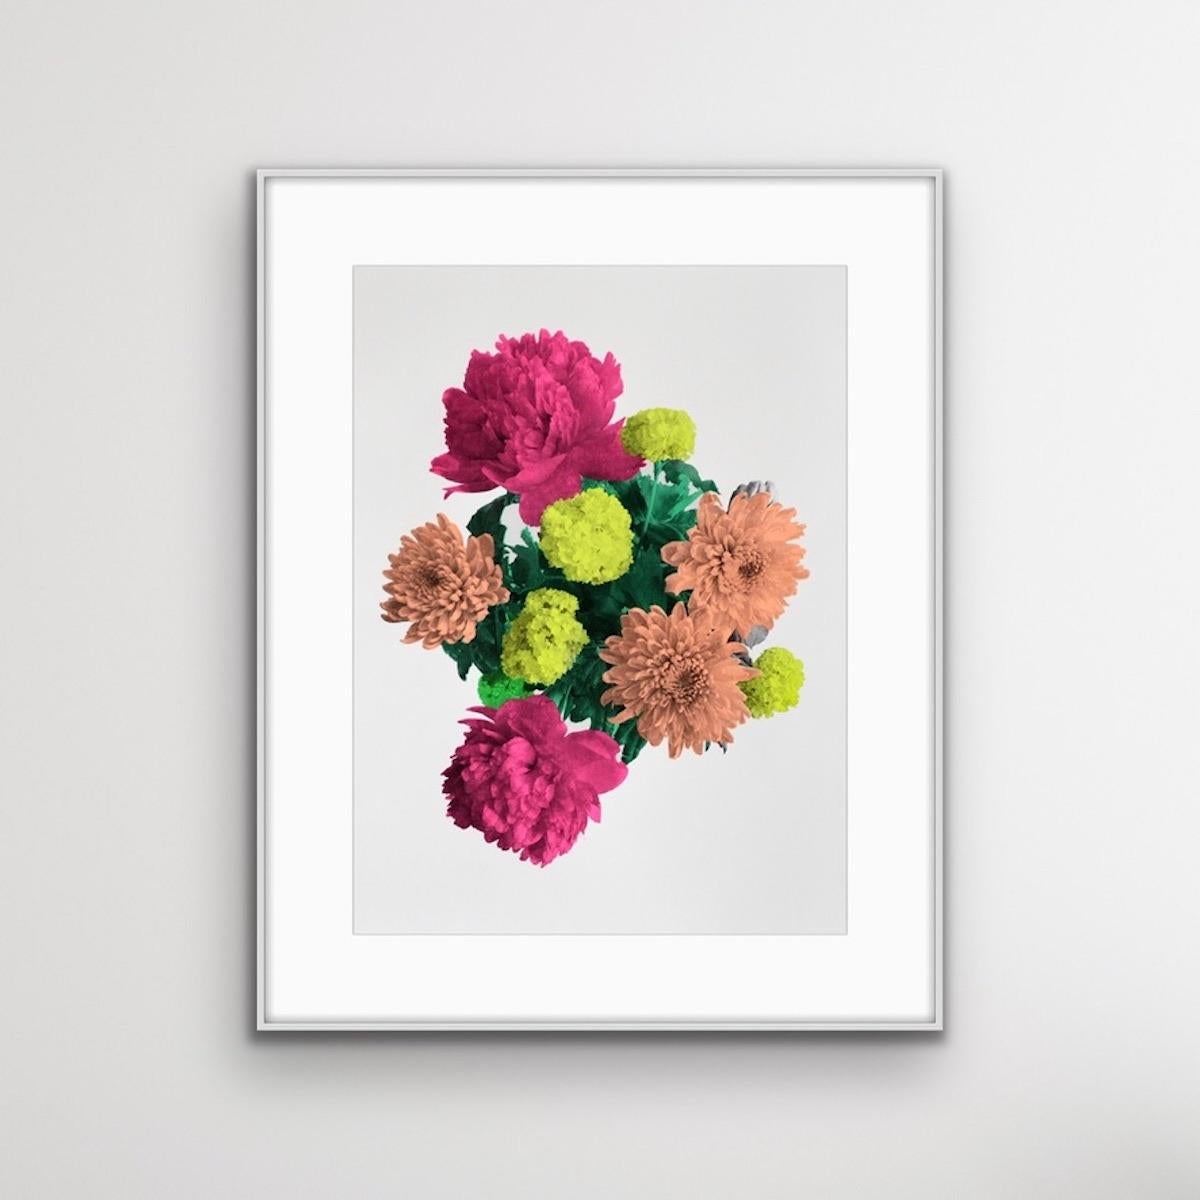 Blooming Happiness, Anne Storno, Limited edition Screen print for sale  1